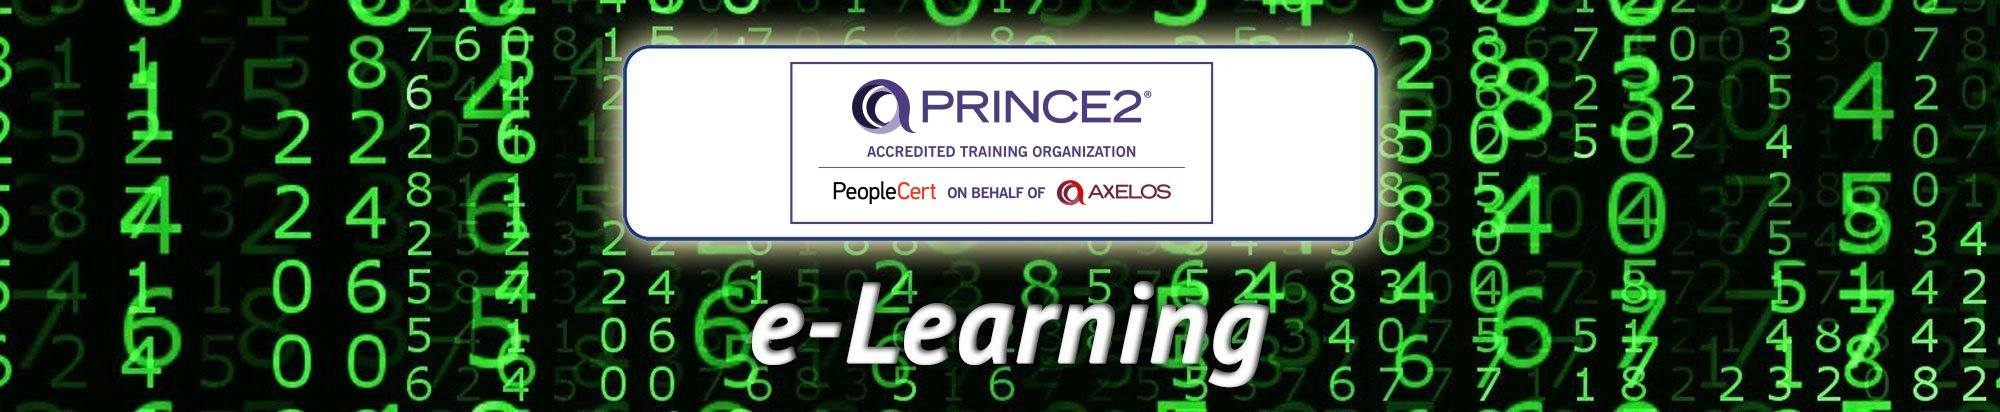 PRINCE2 online 2017 e-Learning training course